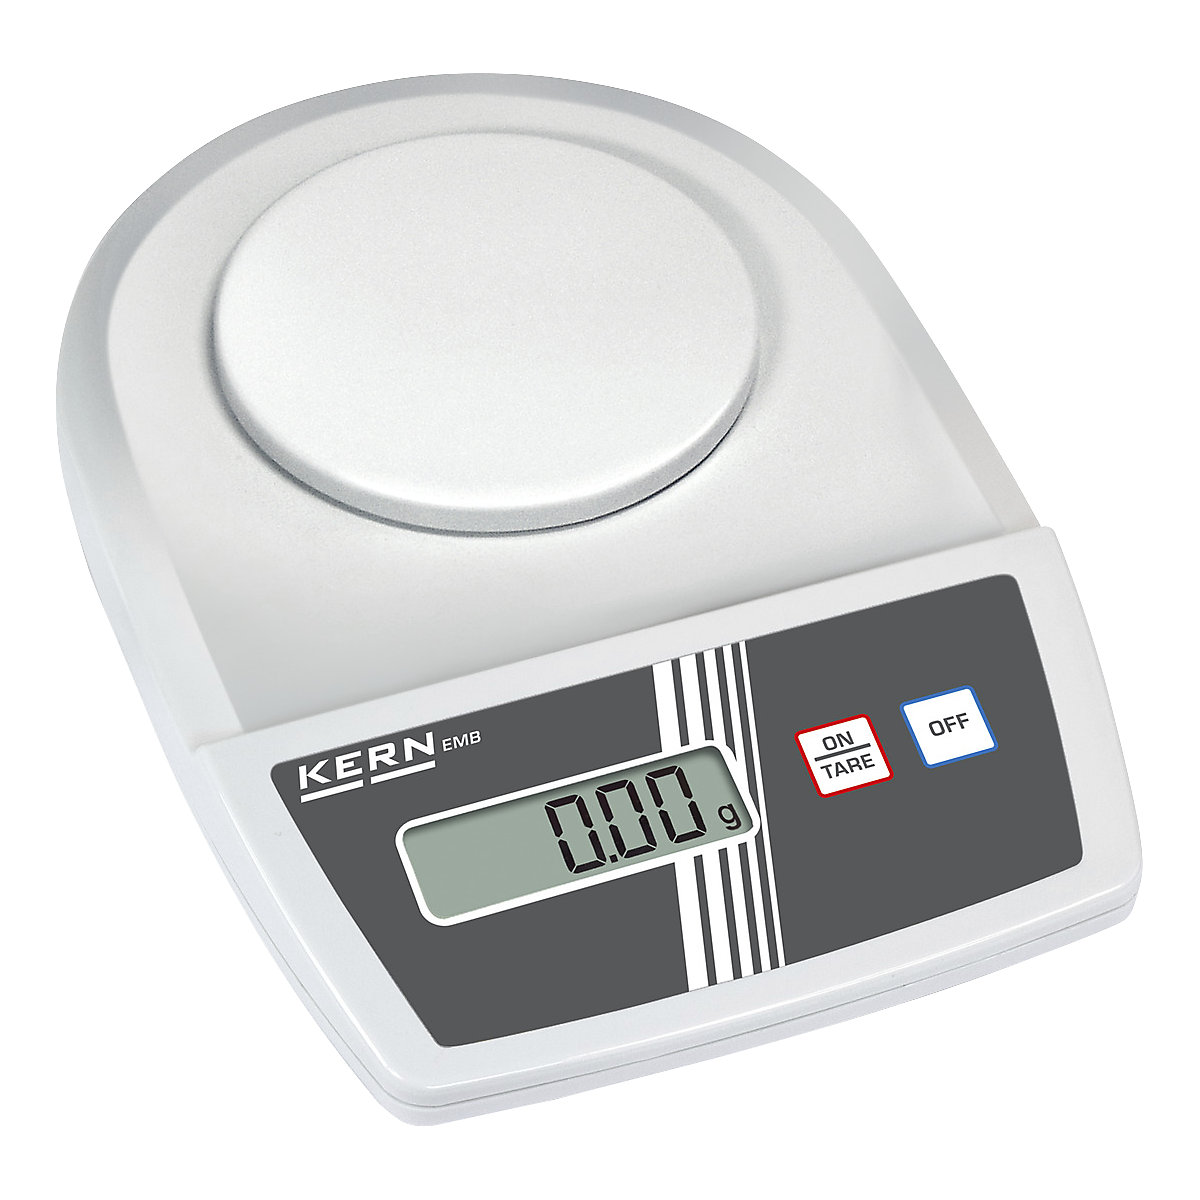 Laboratory scales – KERN, 2 button operation, weighing range up to 200 g, read-out accuracy 0.01 g, weighing plate 105 mm-4